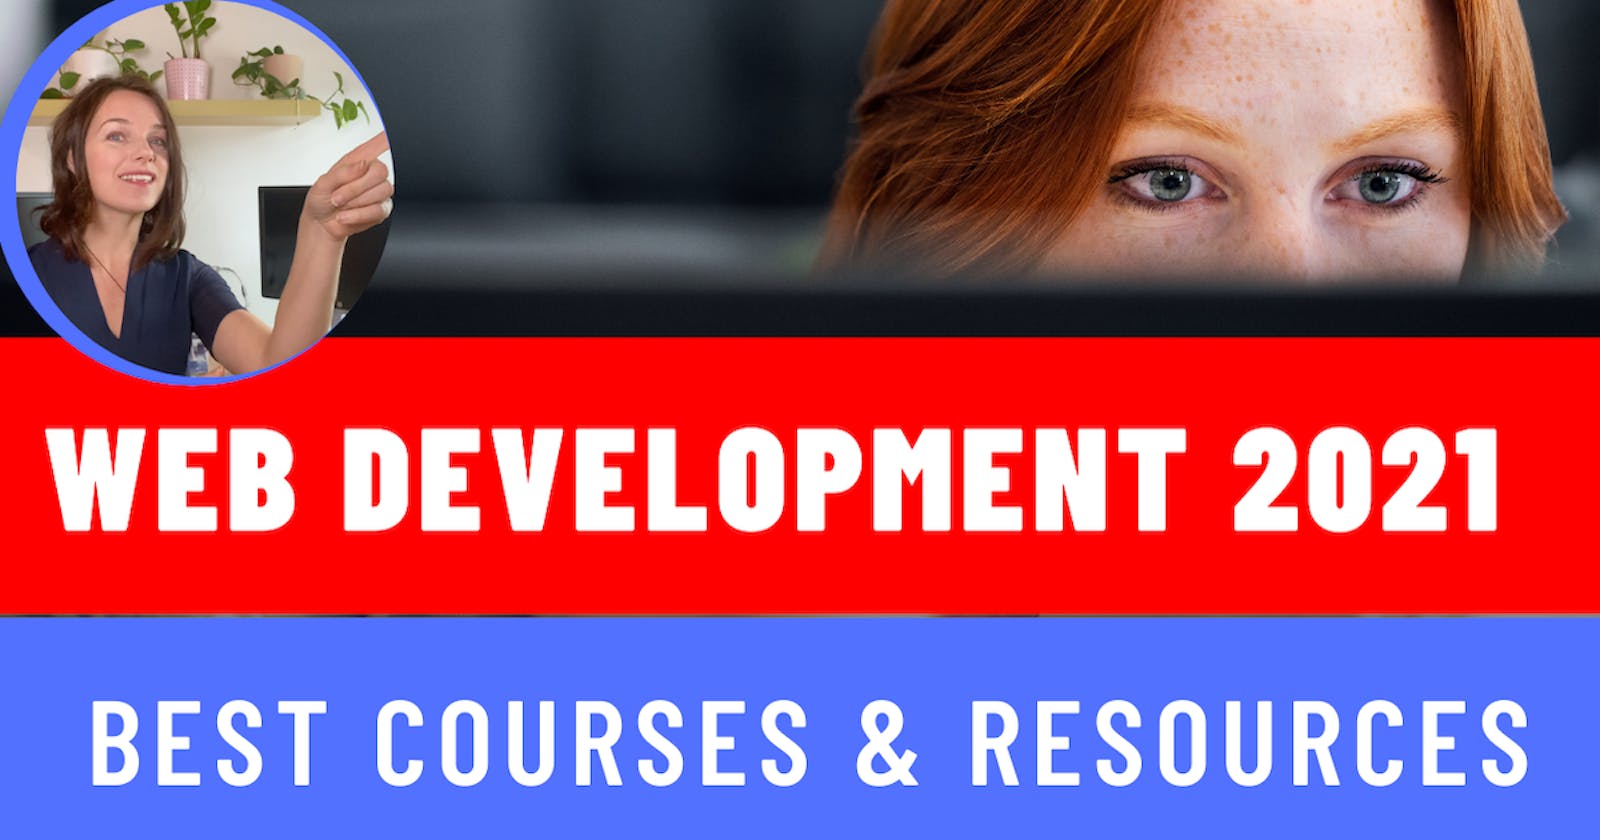 Web Development 2021 - a learning path with the best courses & resources